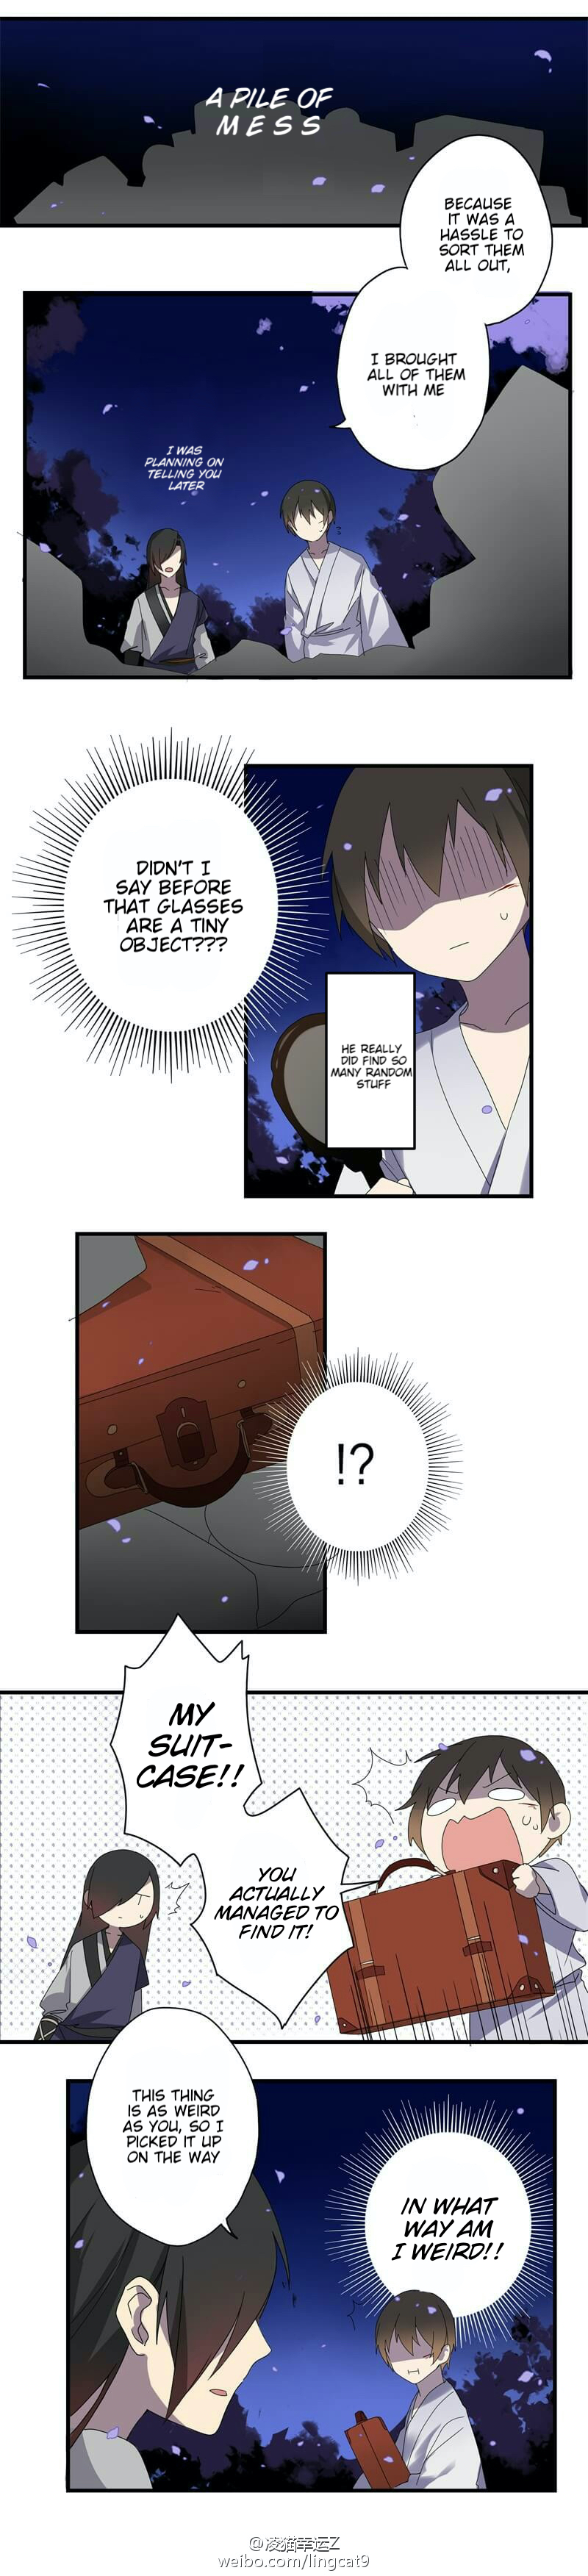 Yuze Of The Peach Blossom Springs - Page 2